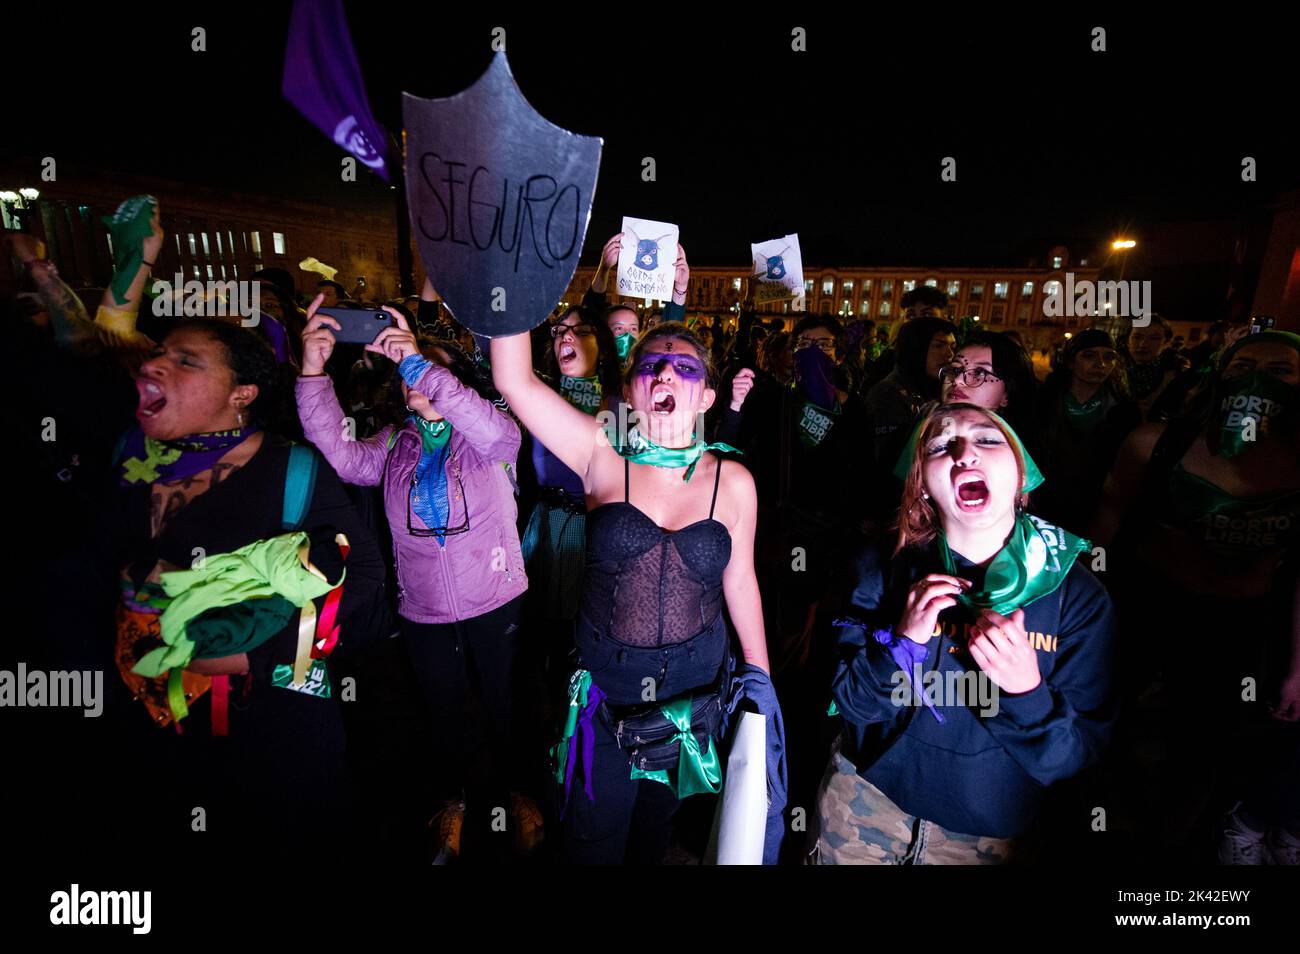 Demonstrators hold pro-choice signs and flags during the International Day for the Remembrance of the Slave Trade and its Abolition demonstrations in Stock Photo